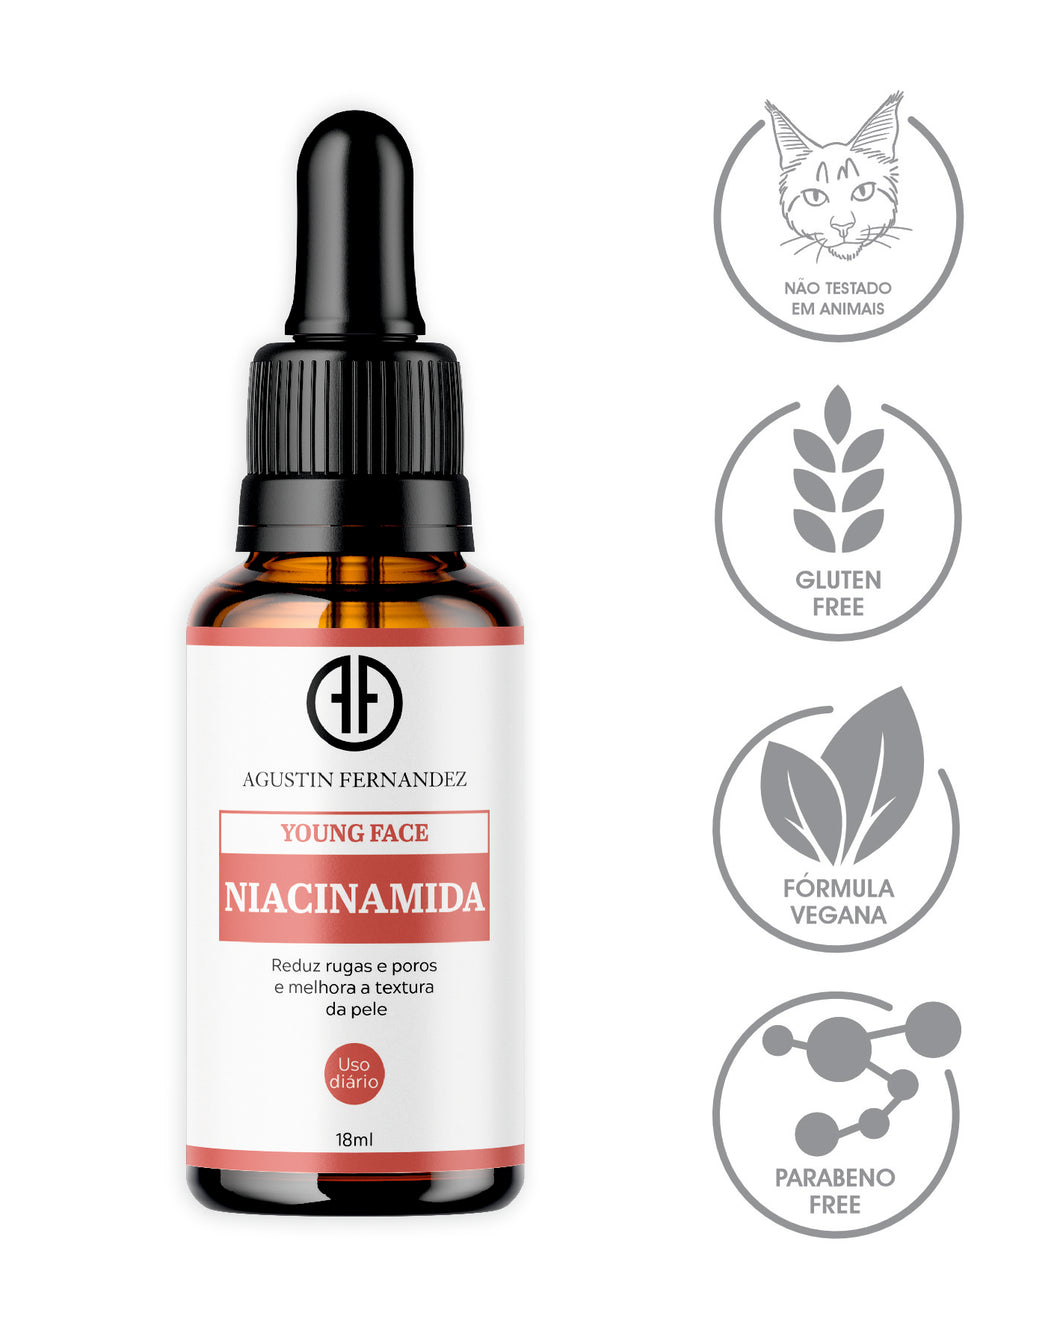 NIACINAMIDE Serum for oiliness and blemishes